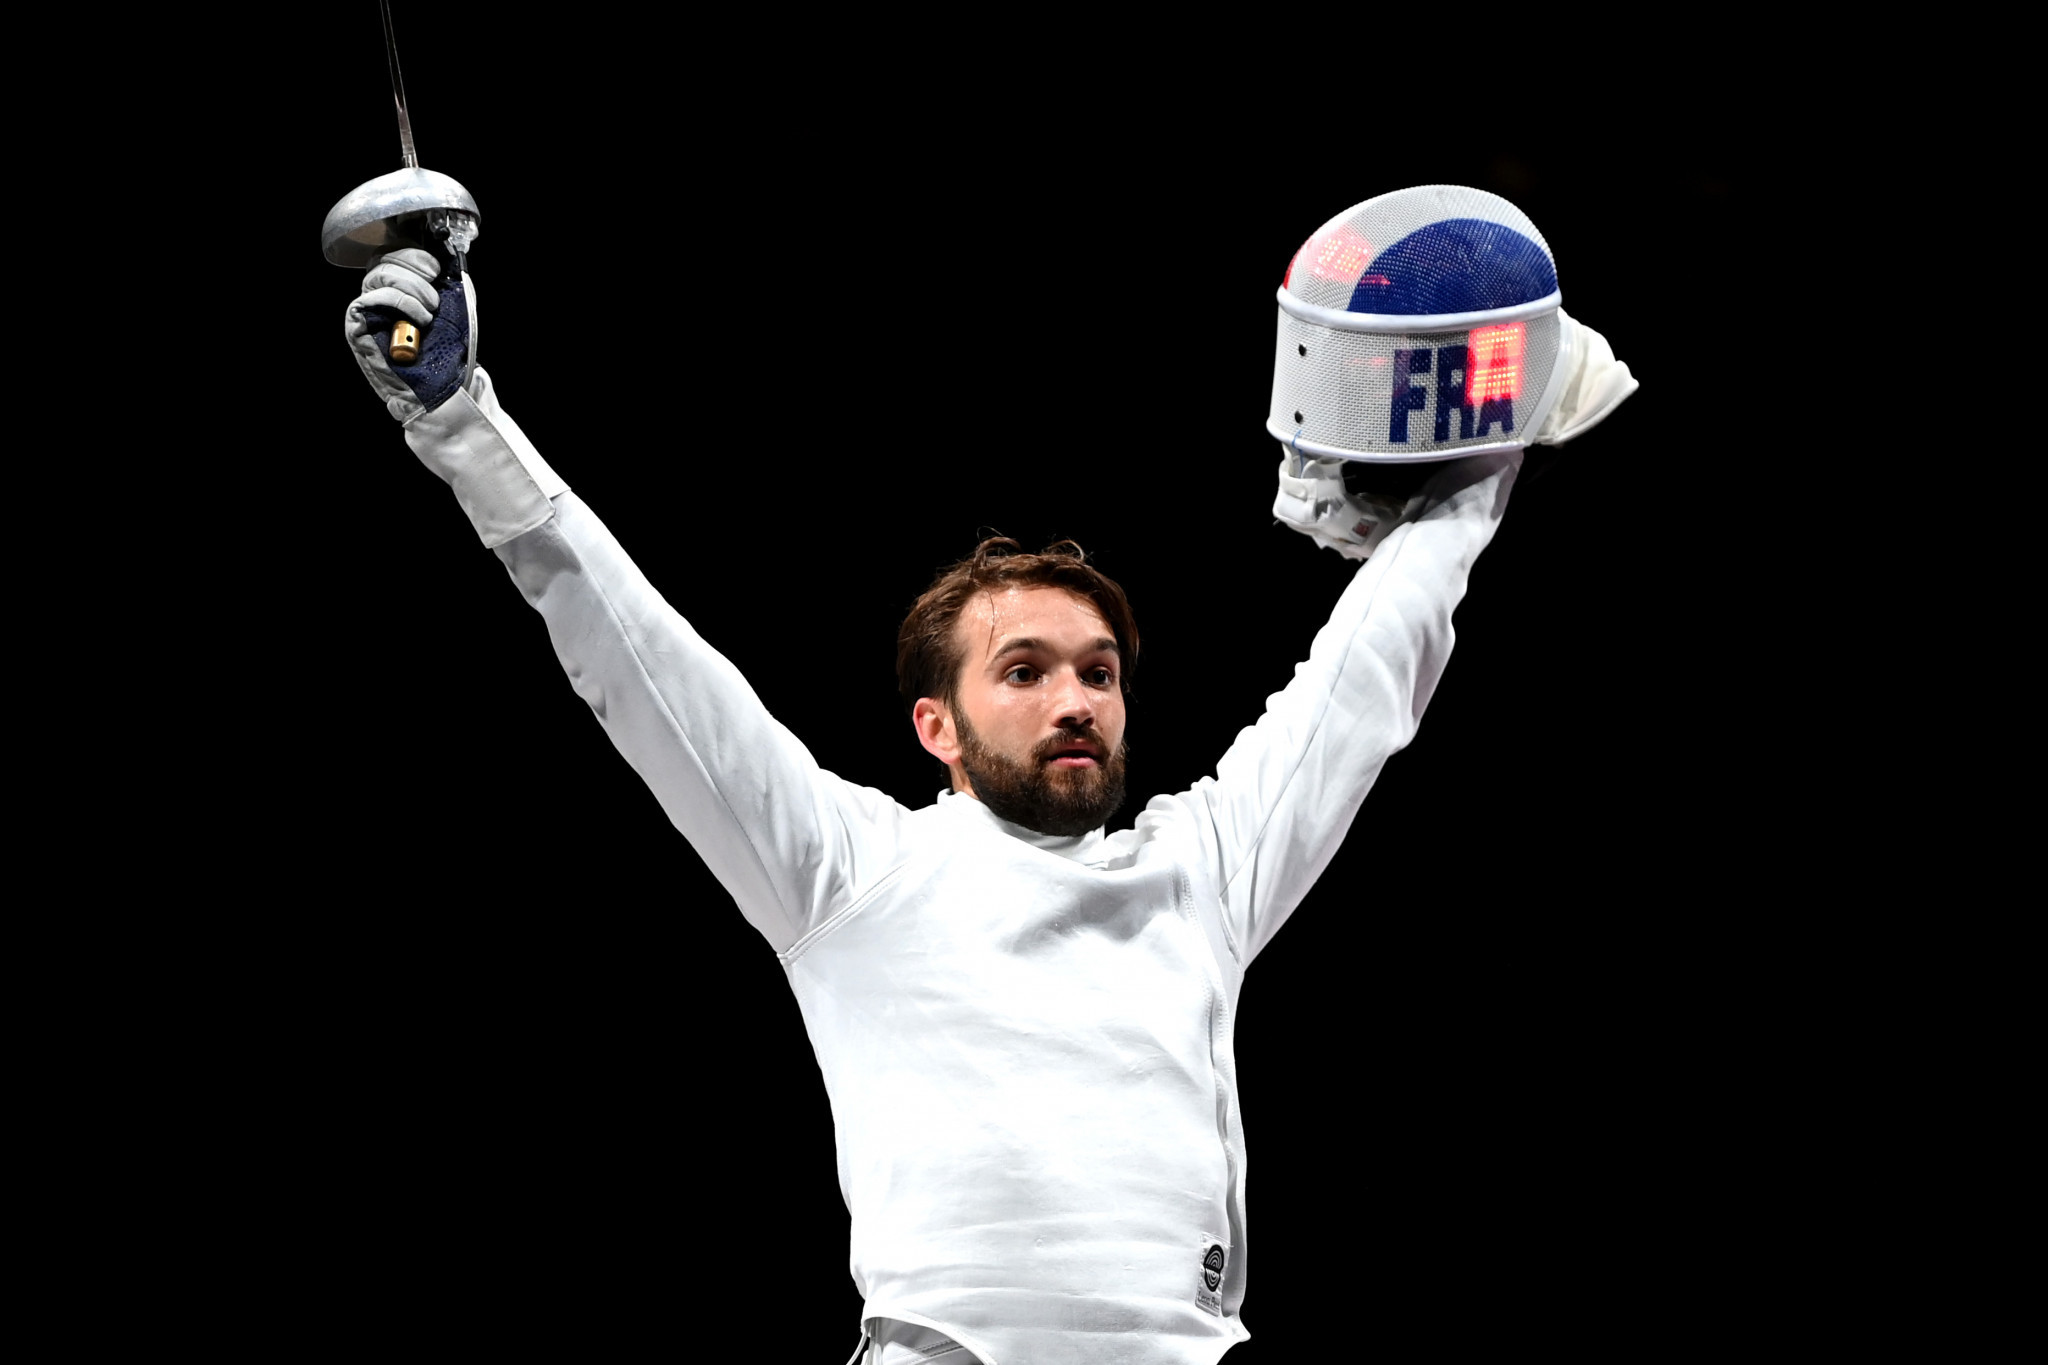 France's Romain Cannone headlines the men's épée field at the European Fencing Championships ©Getty Images